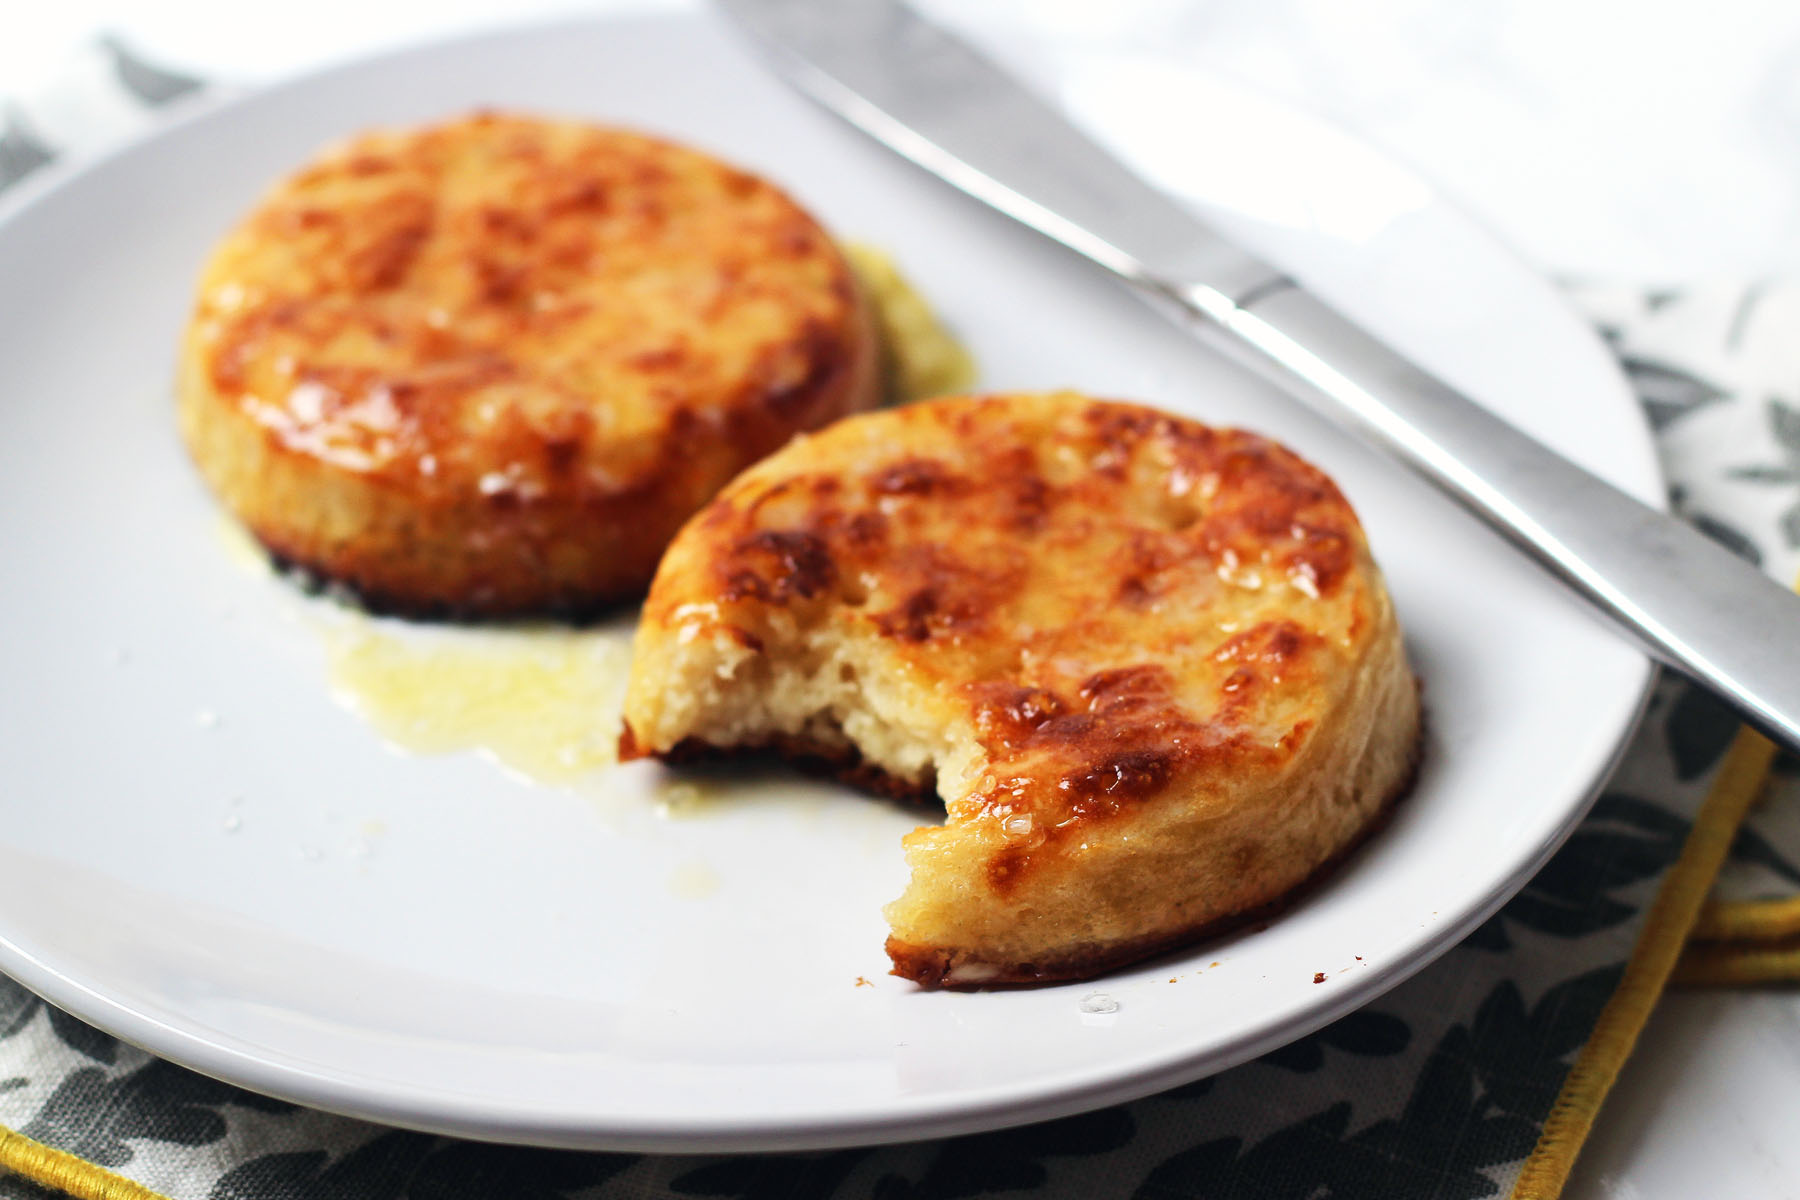 How to make Crumpets at Home